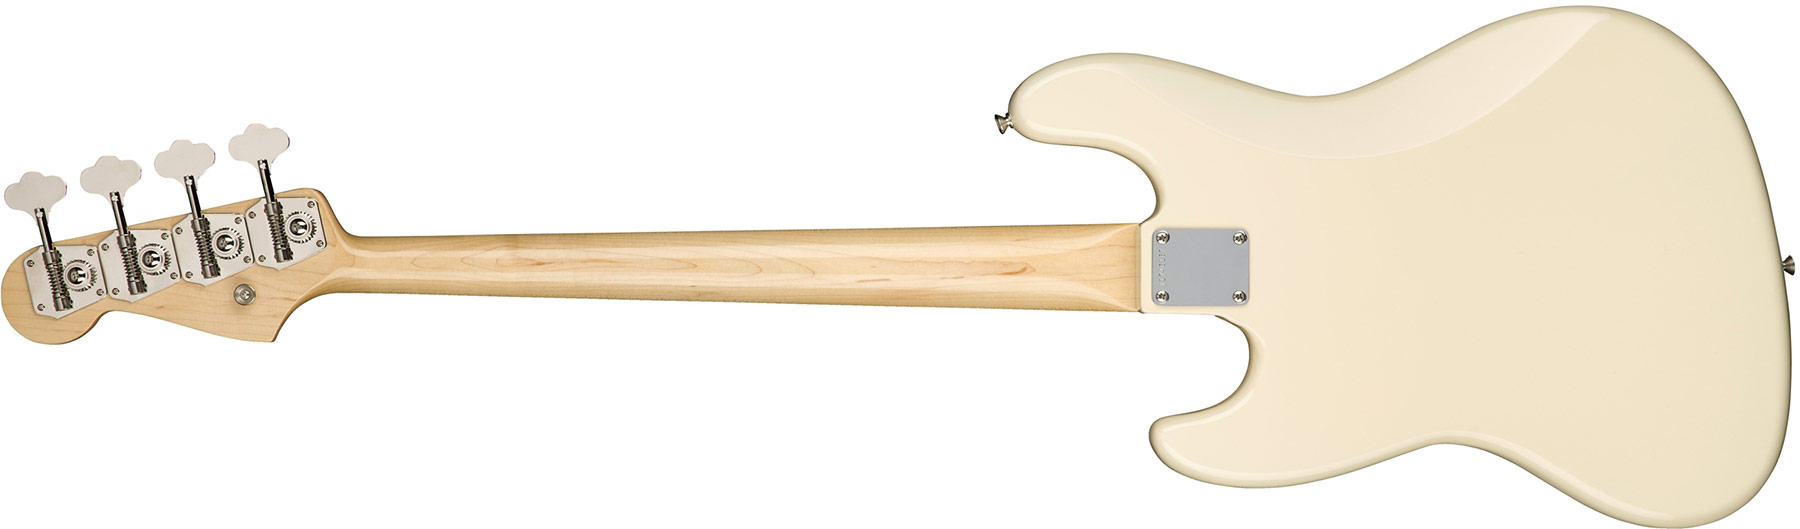 Fender Jazz Bass '60s American Original Usa Rw - Olympic White - Solid body electric bass - Variation 2